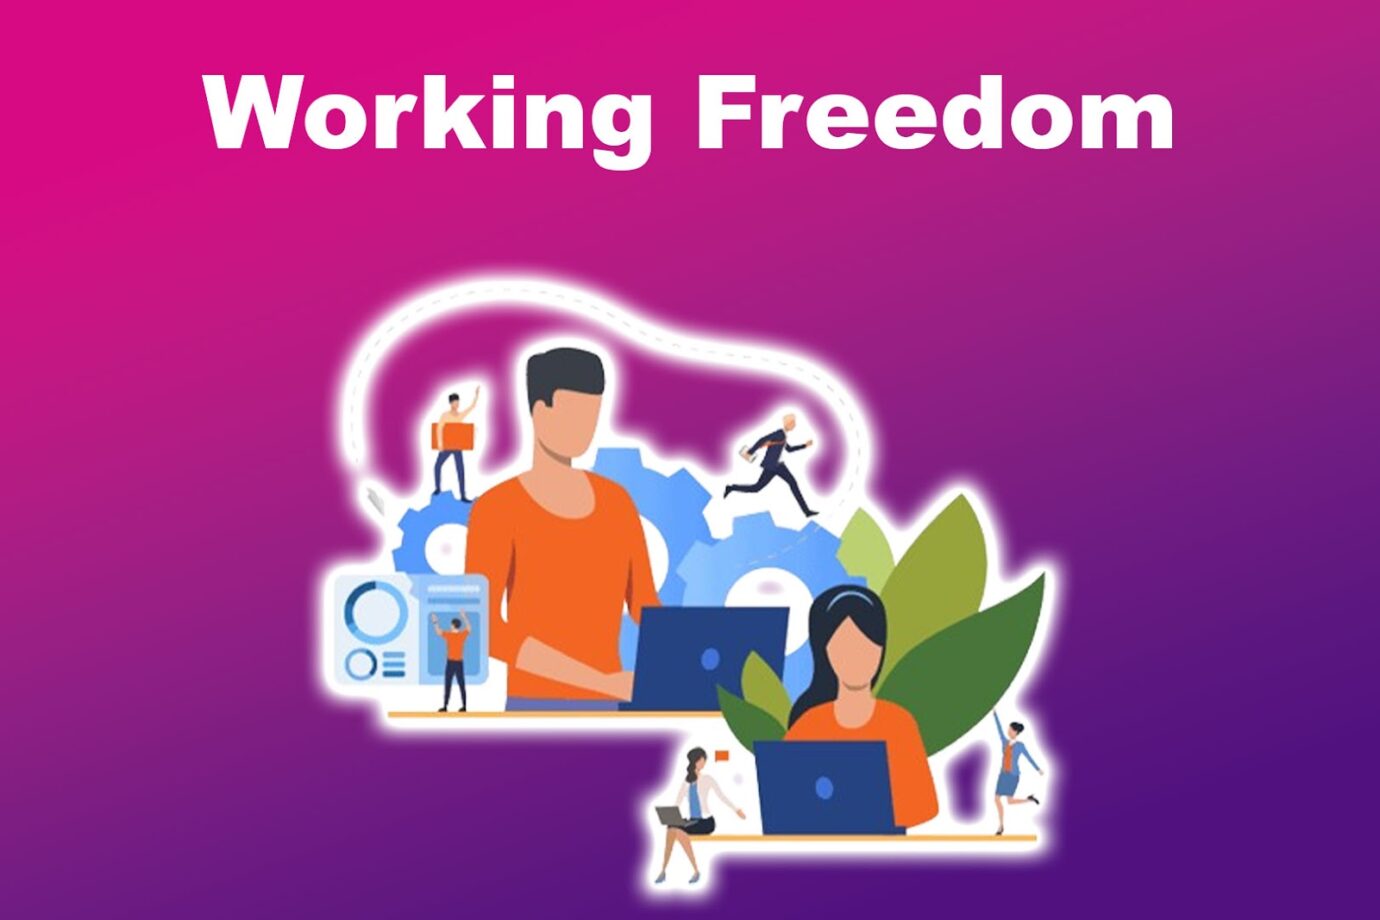 Remote Work Pros - More Freedom